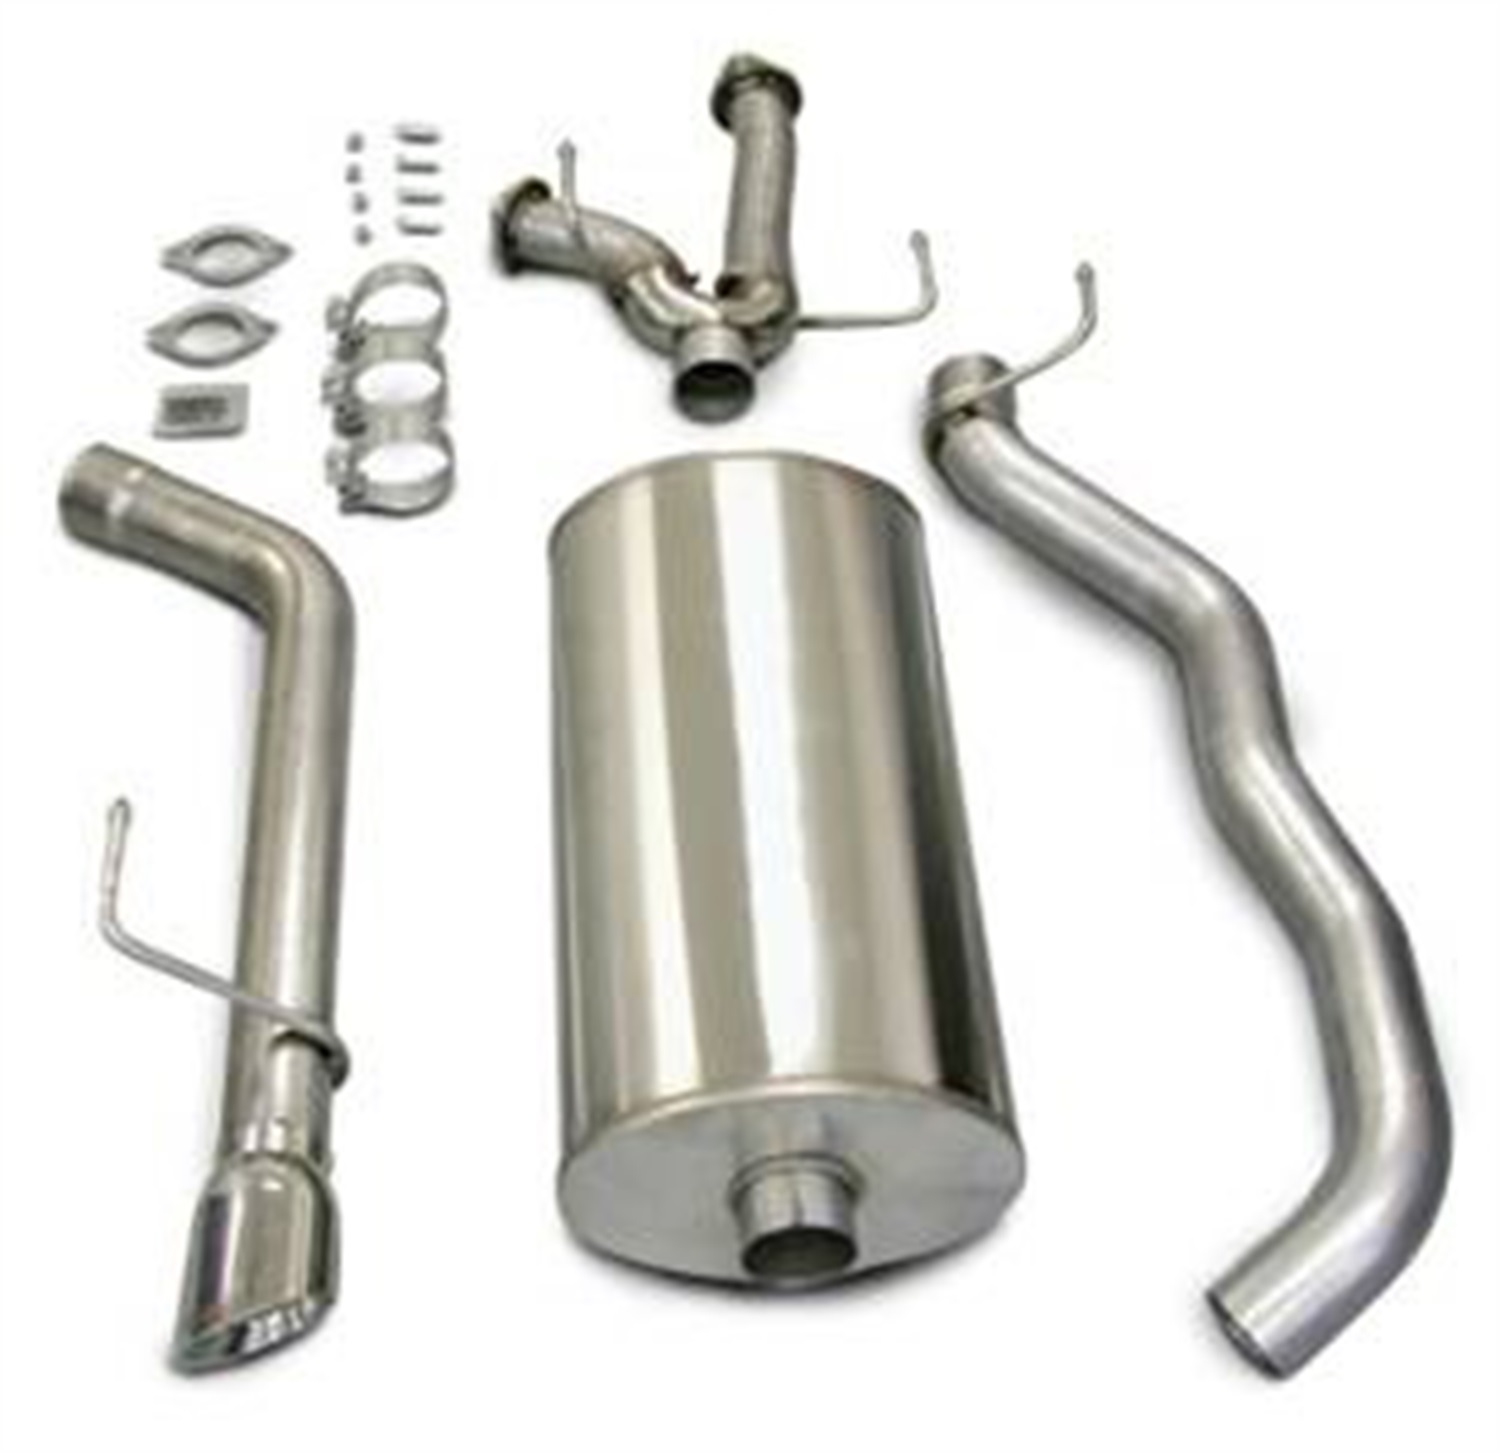 Corsa Performance 14573 Touring Cat-Back Exhaust System Fits 08-17 Sequoia